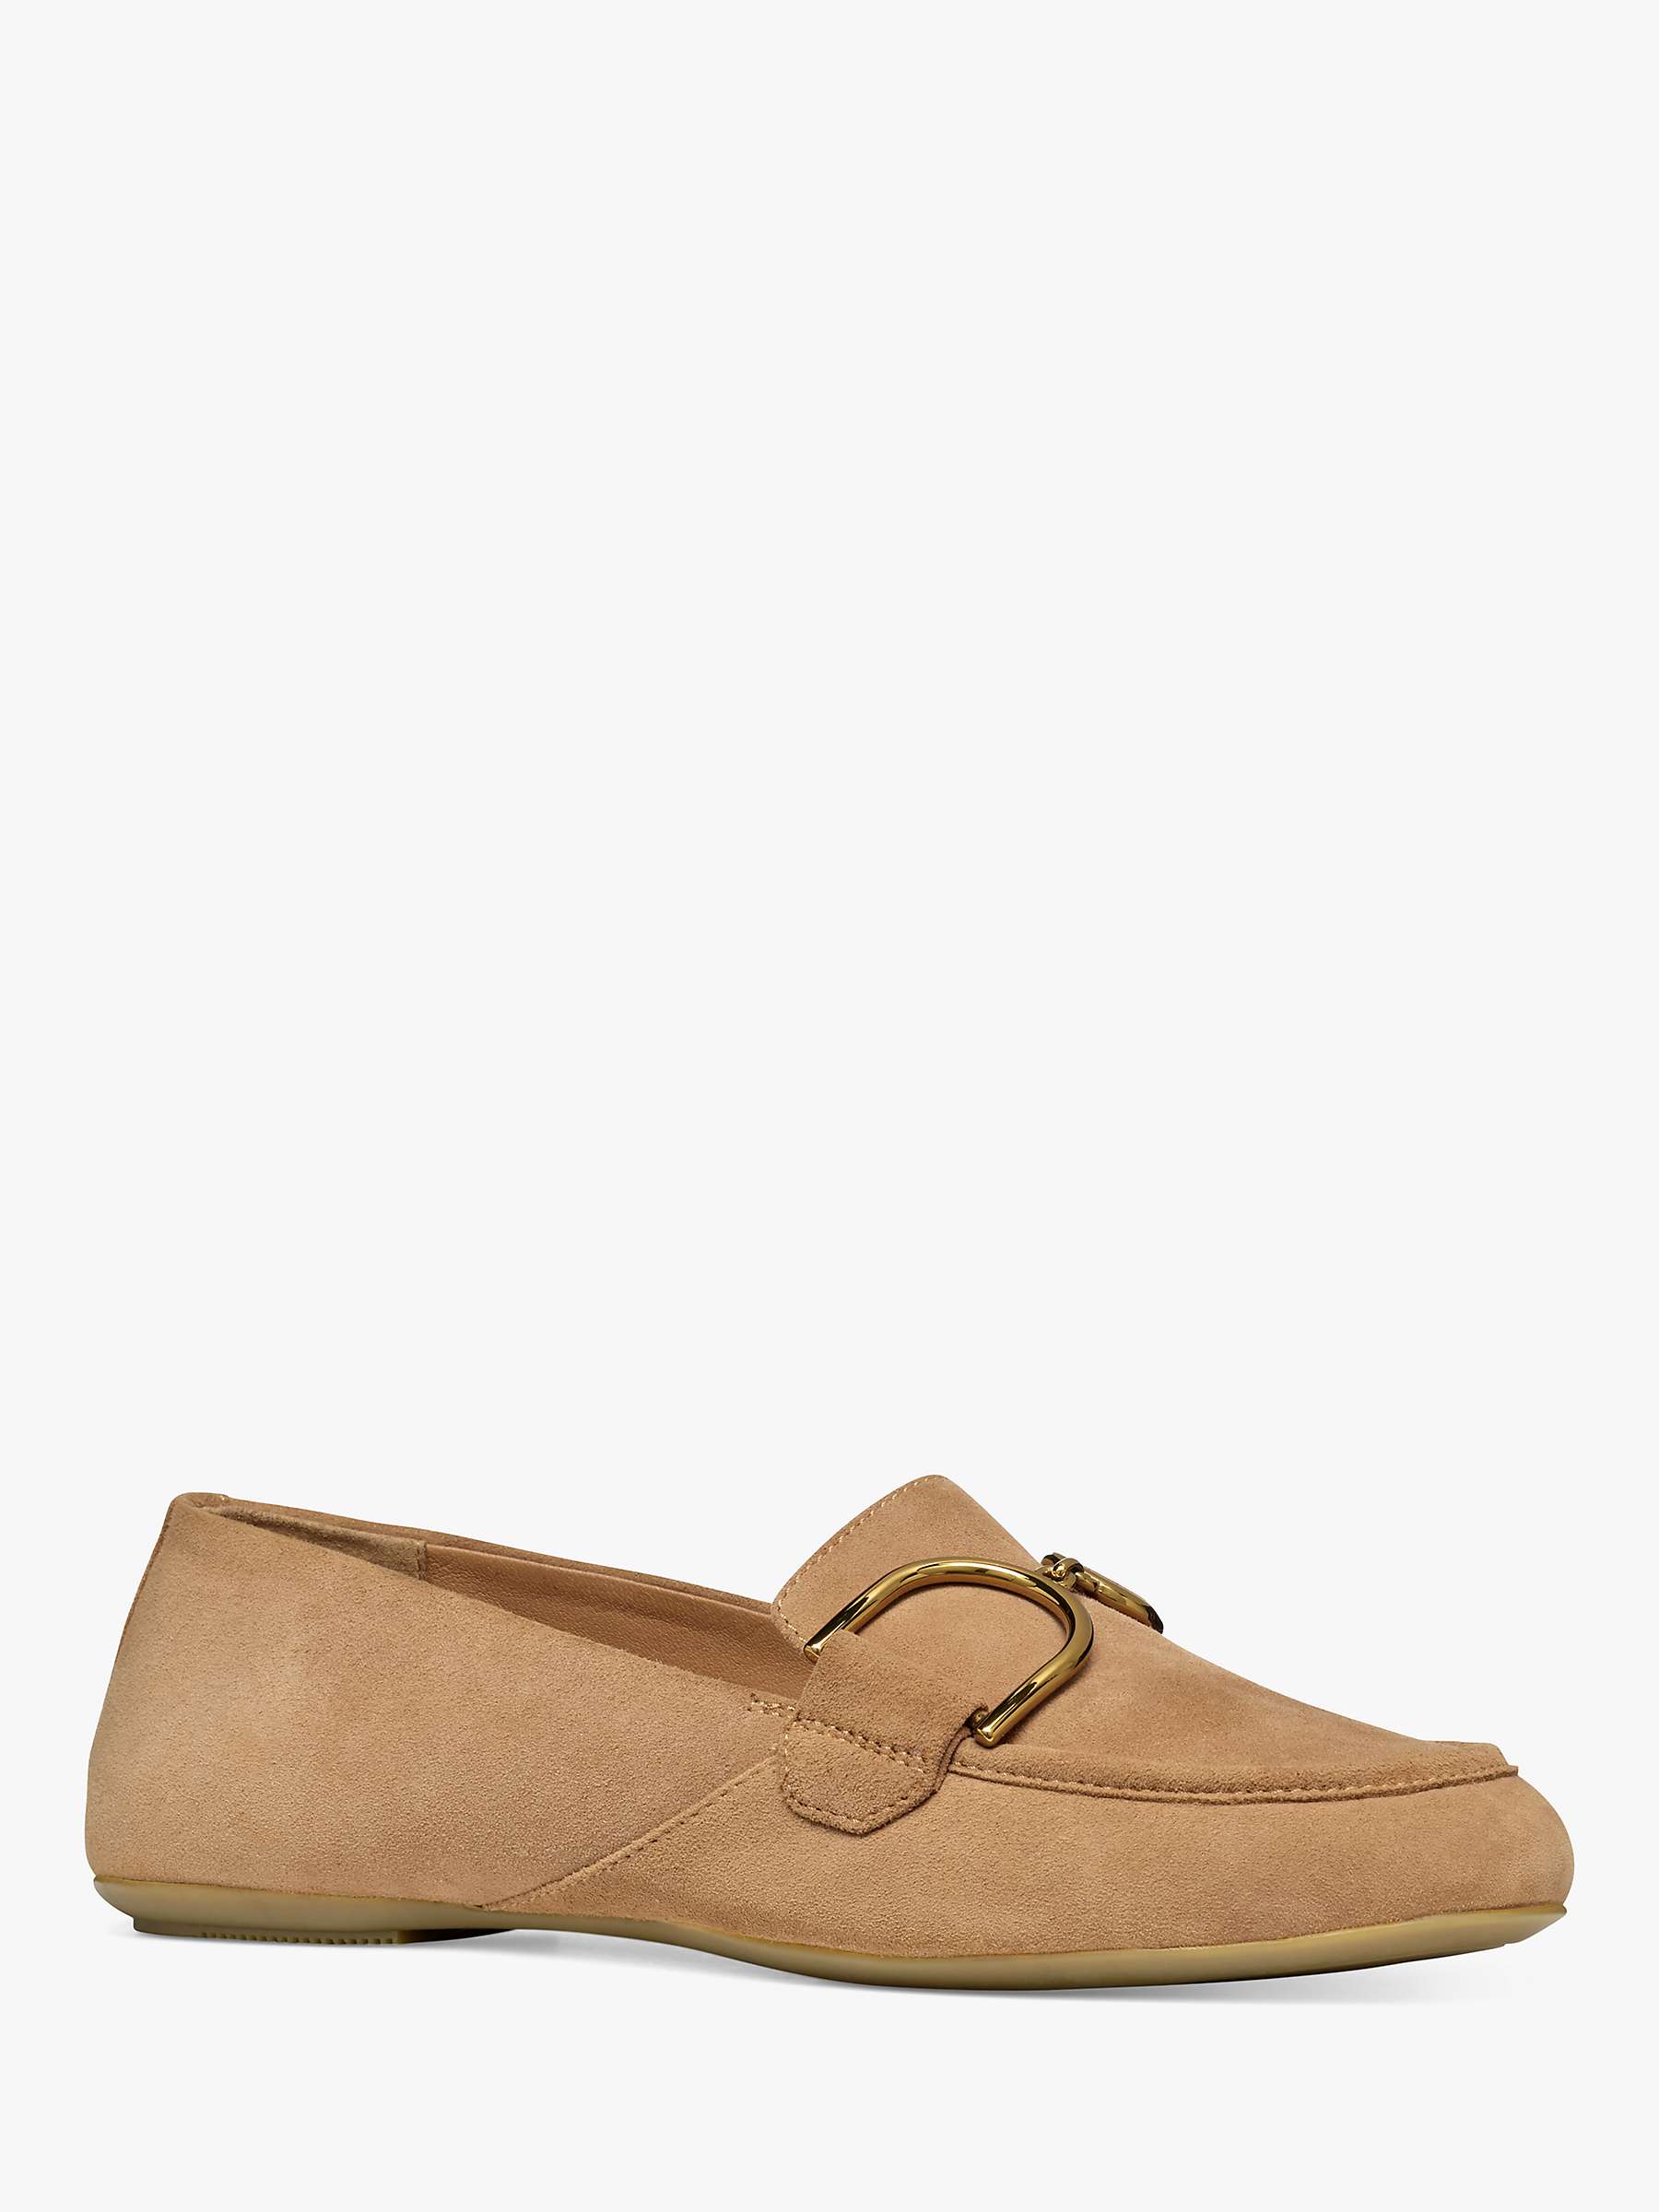 Buy Geox Palmaria Suede Loafers Online at johnlewis.com